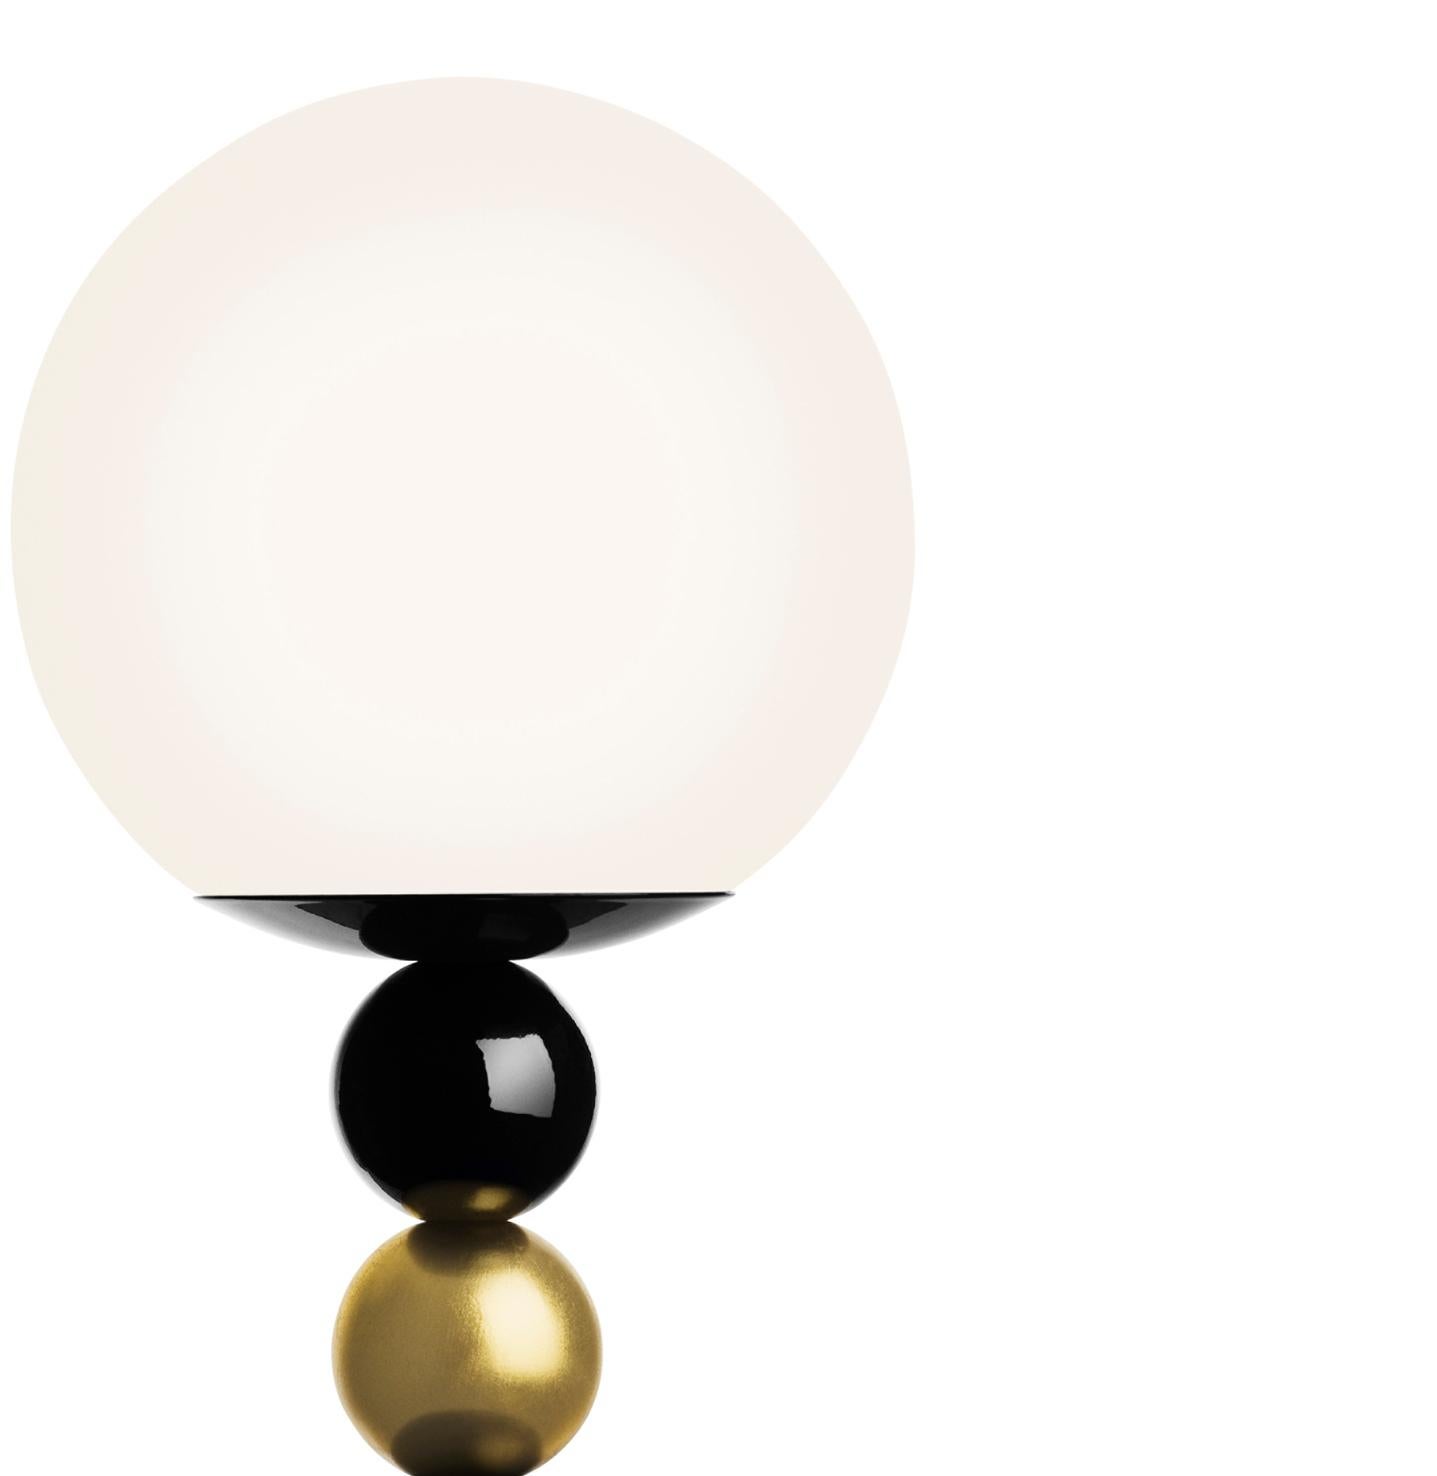 Fredrik Mattson took the idea of “lighting as jewelry” very seriously when designing his RGB floor lamp with its stacked wooden balls painted in glossy shades of black, green and gold (or all black). Punctuated with a white glass globe, the fixture